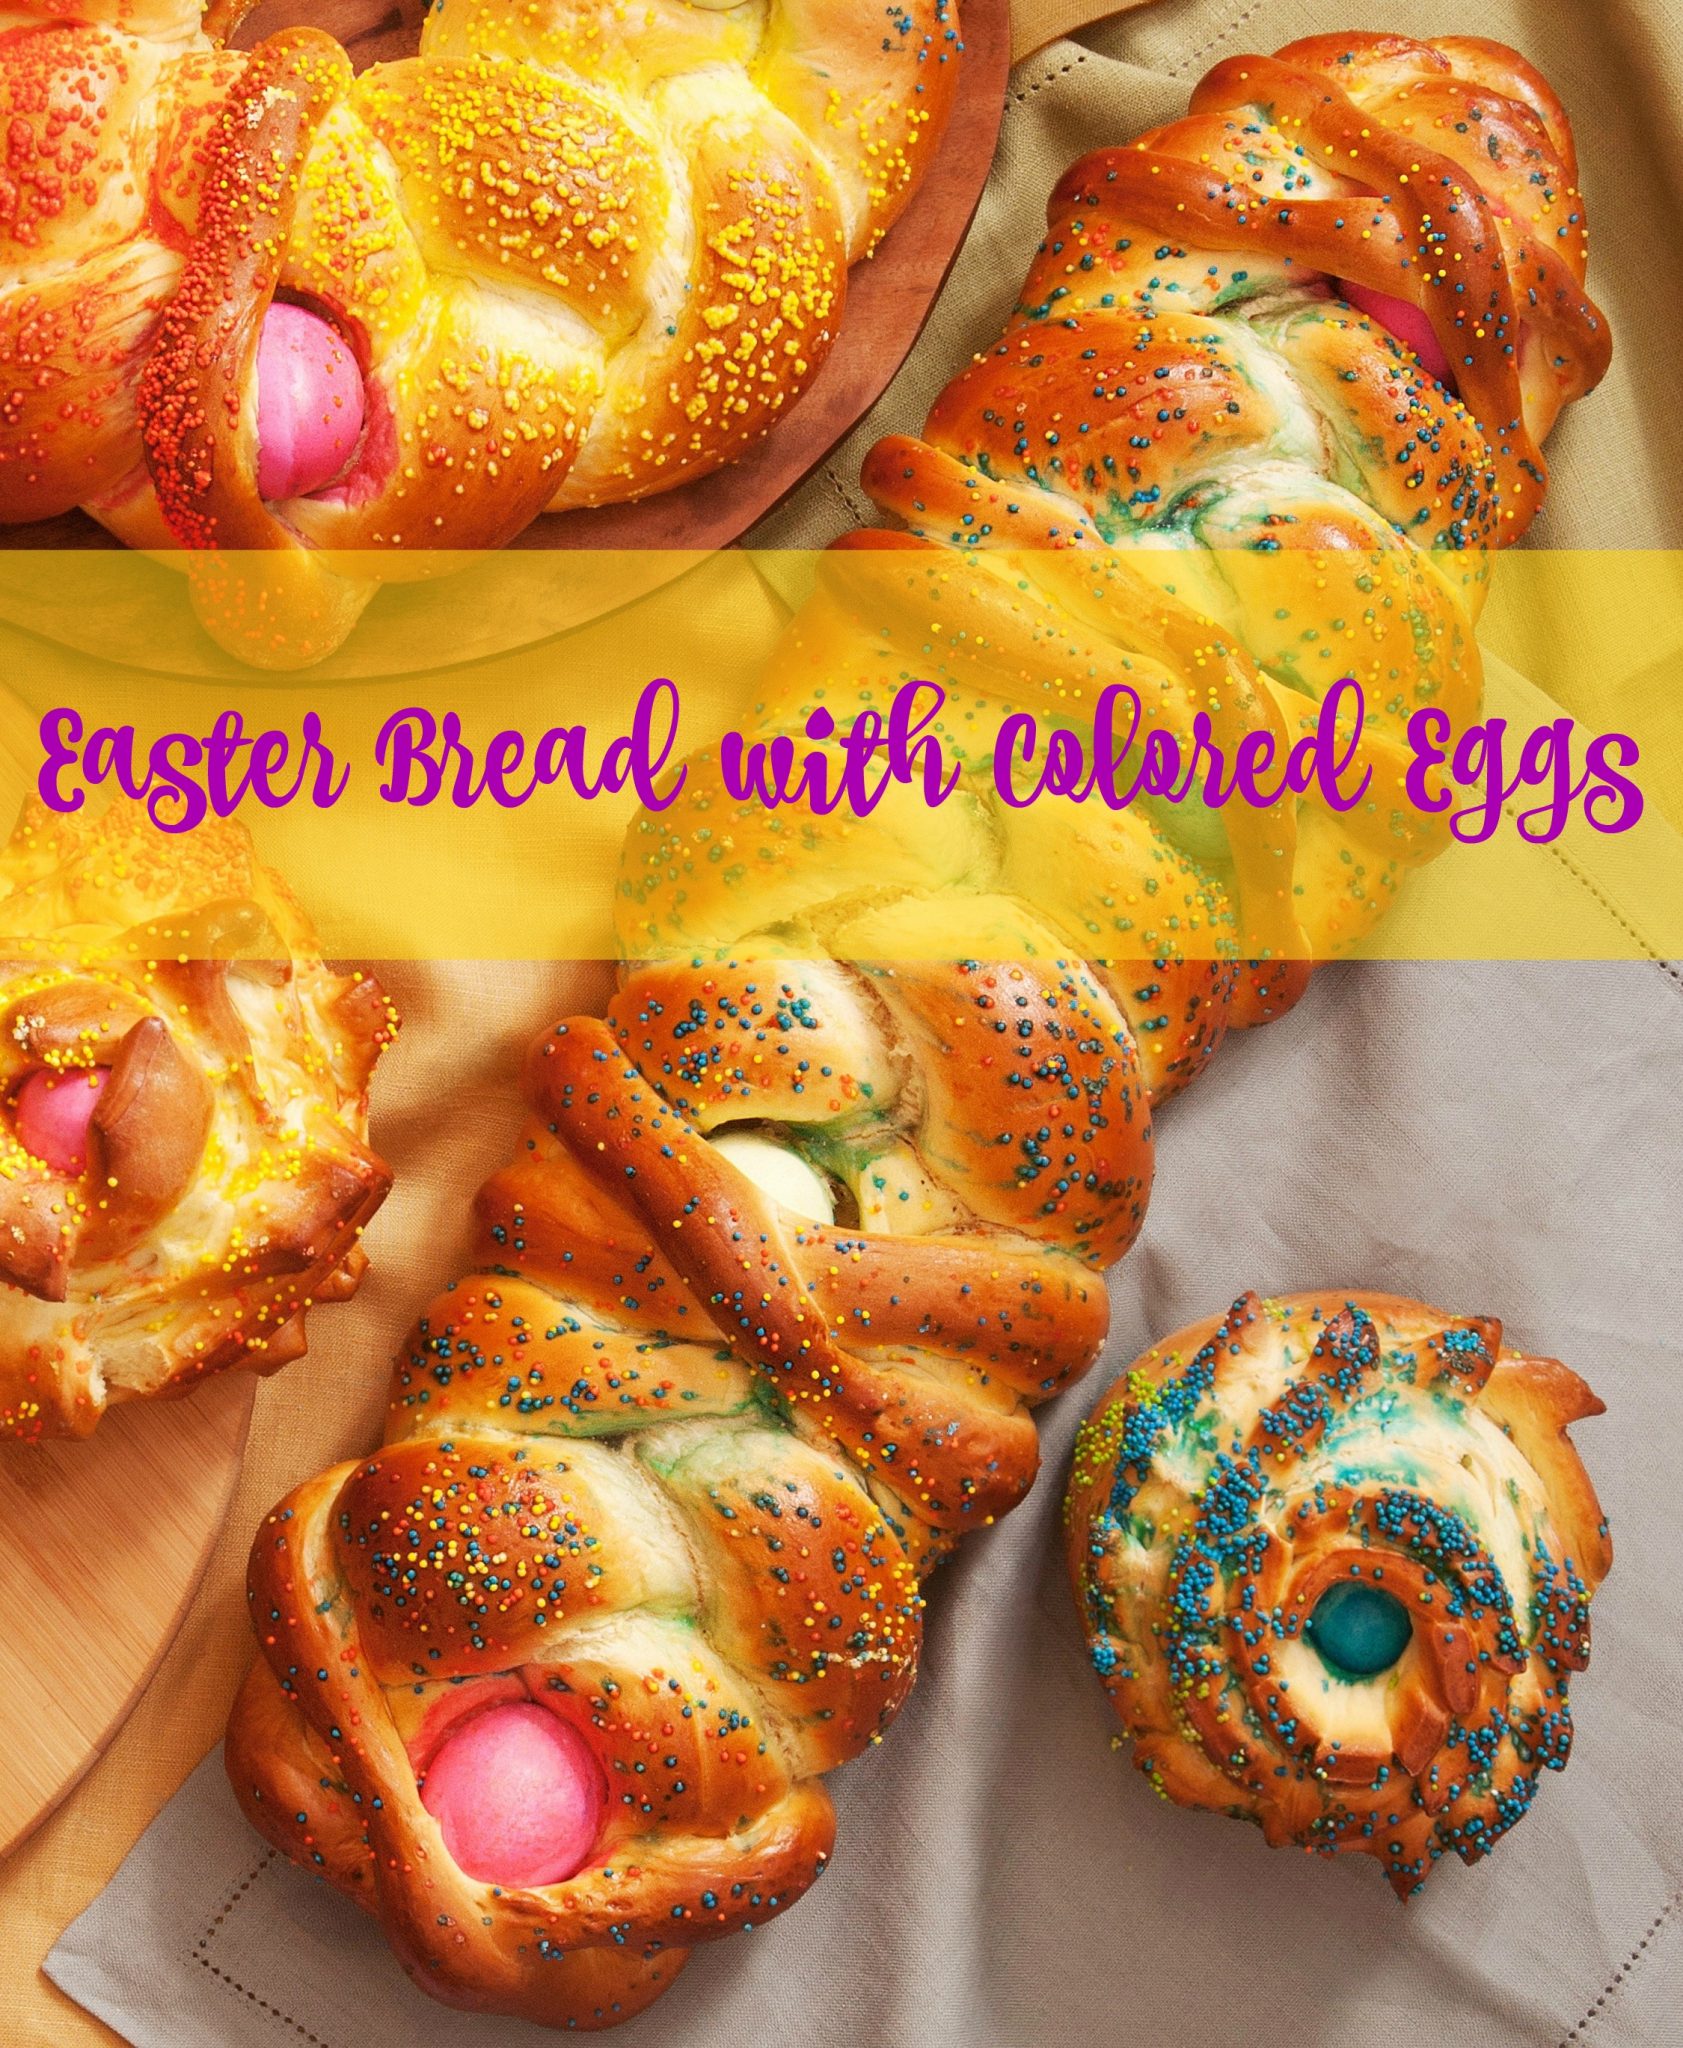 Easter Bread with Colored Eggs Recipe